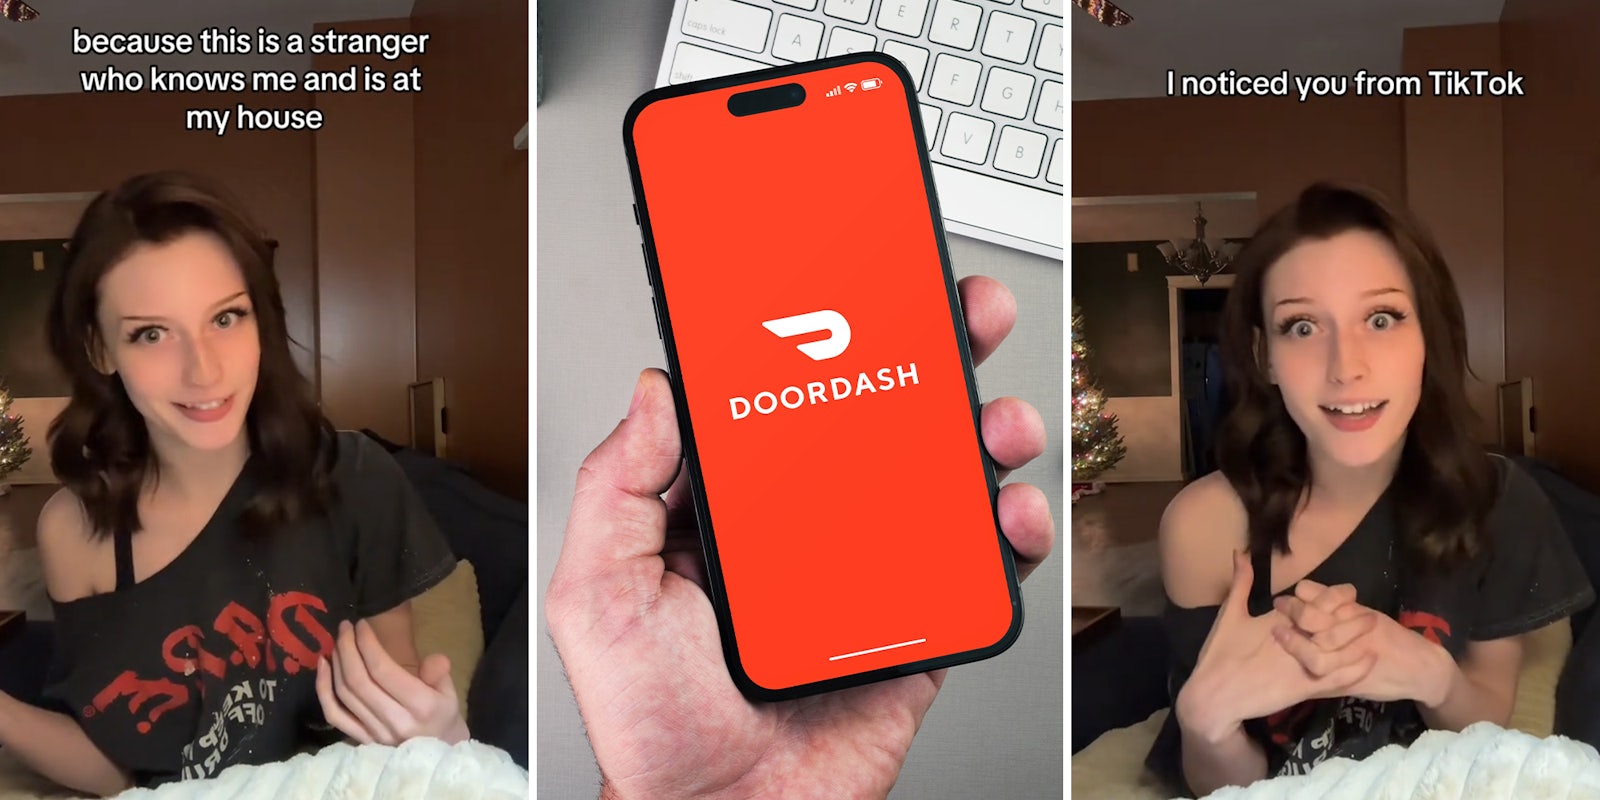 DoorDash customer leaves delivery instructions. Driver knocks anyway and asks to follow her on Instagram